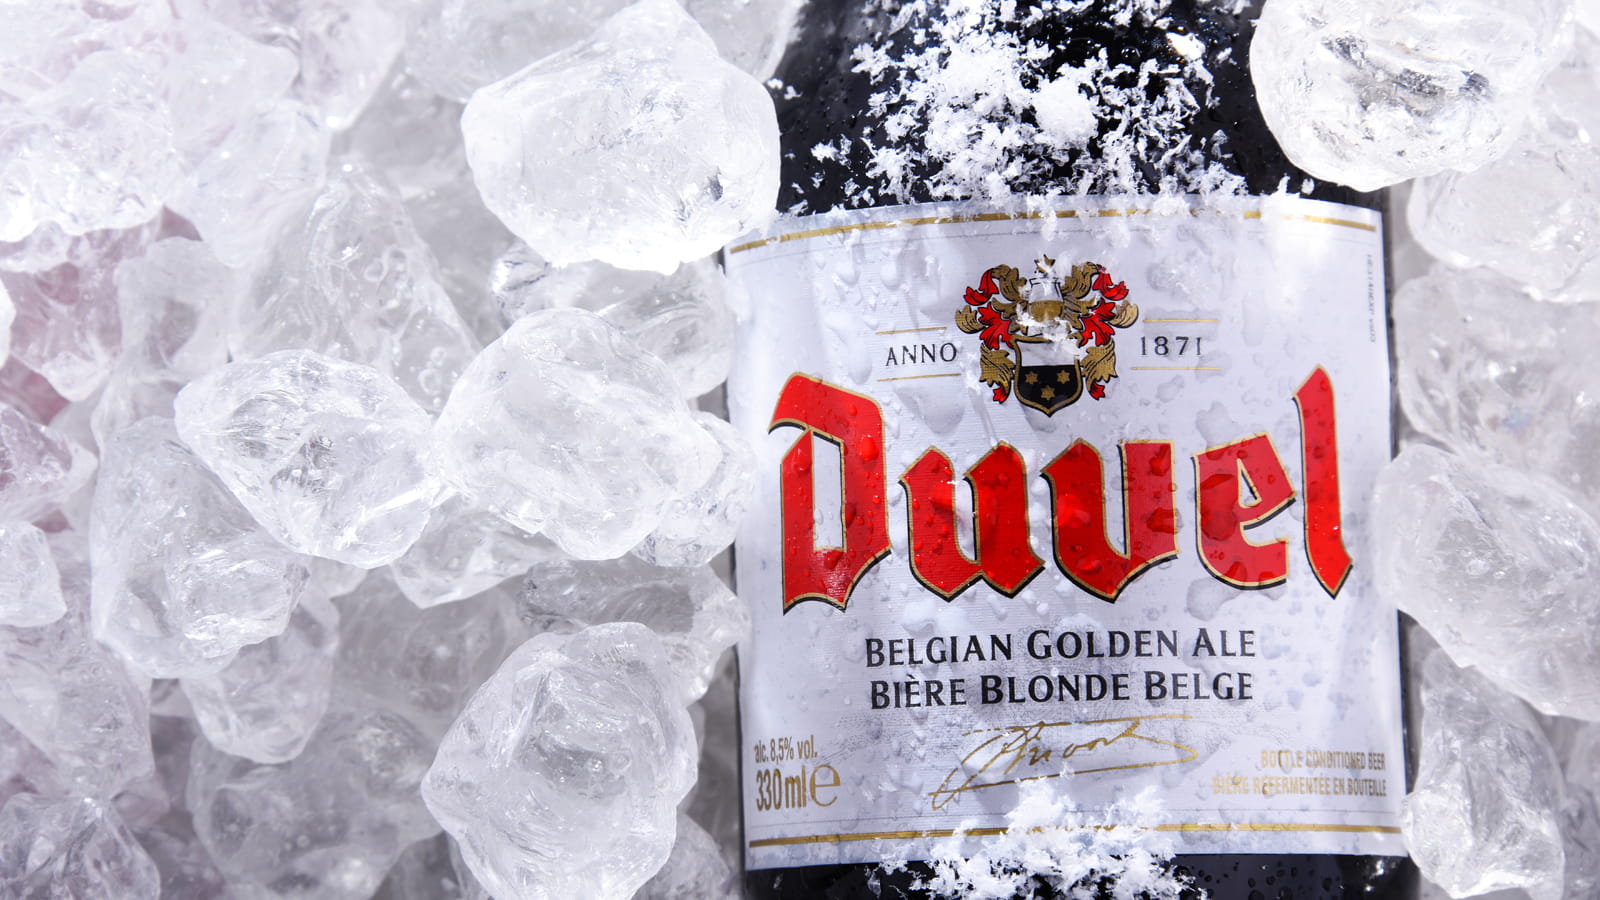 Duvel says it has "more than enough" beer after ransomware attack